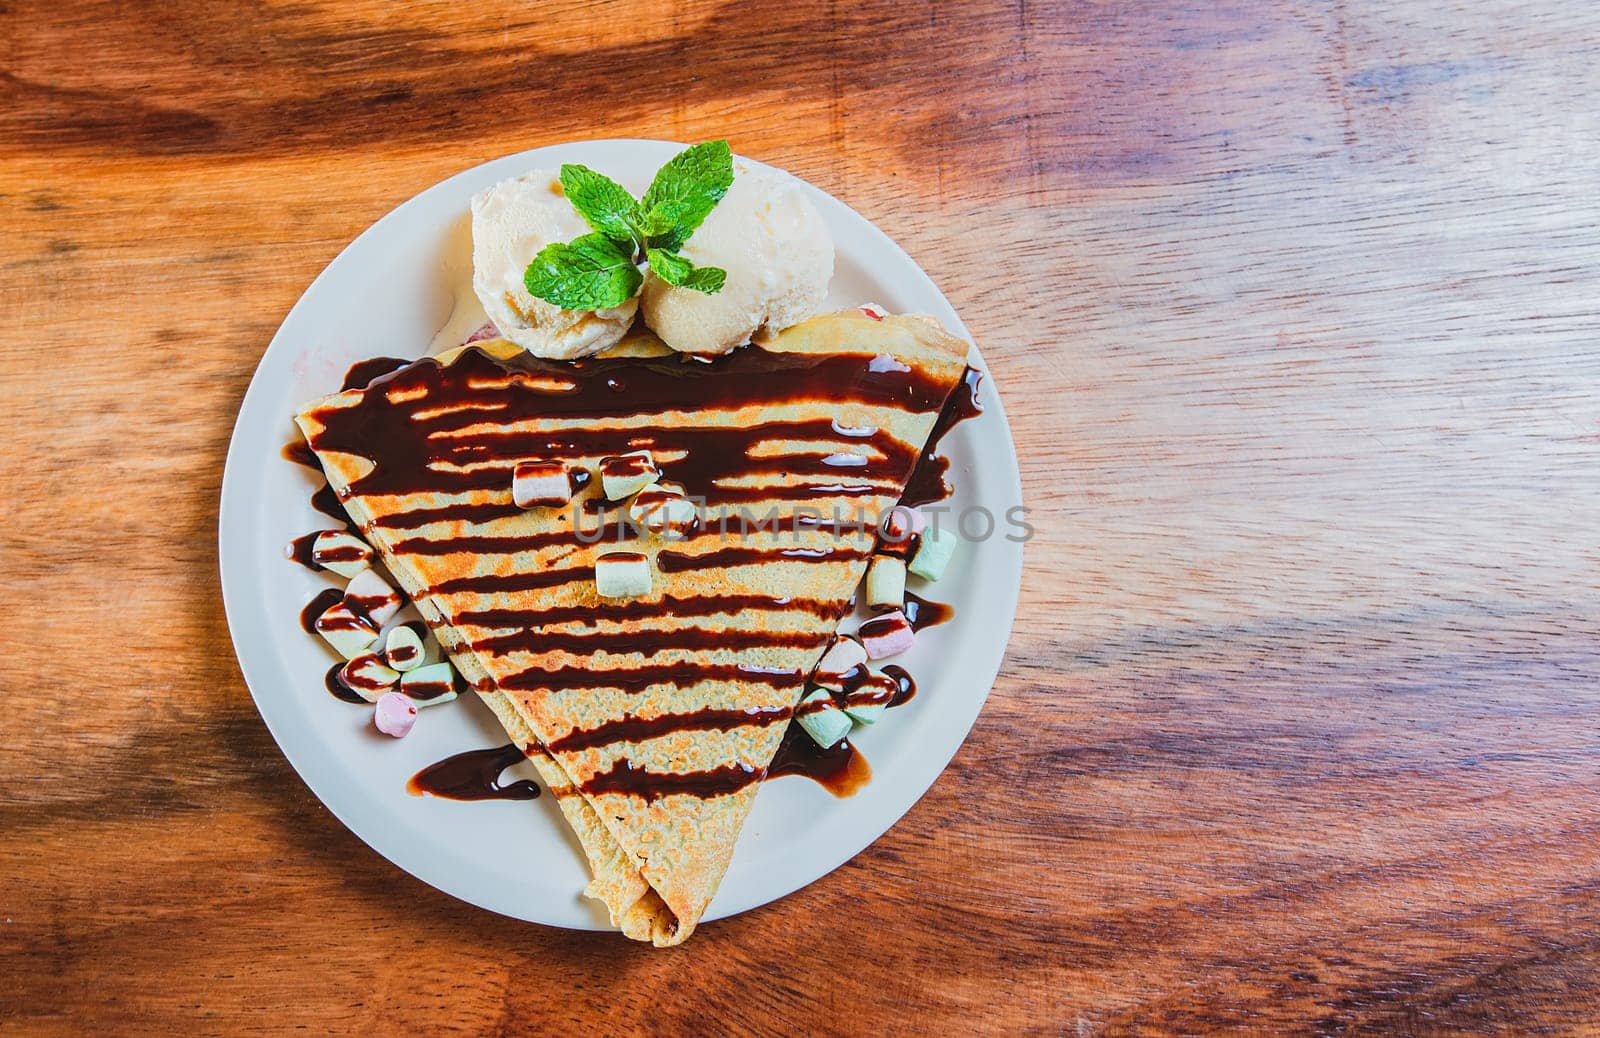 Top view of chocolate crepe with ice cream on wooden table. High angle view of chocolate crepe with ice cream on wooden background